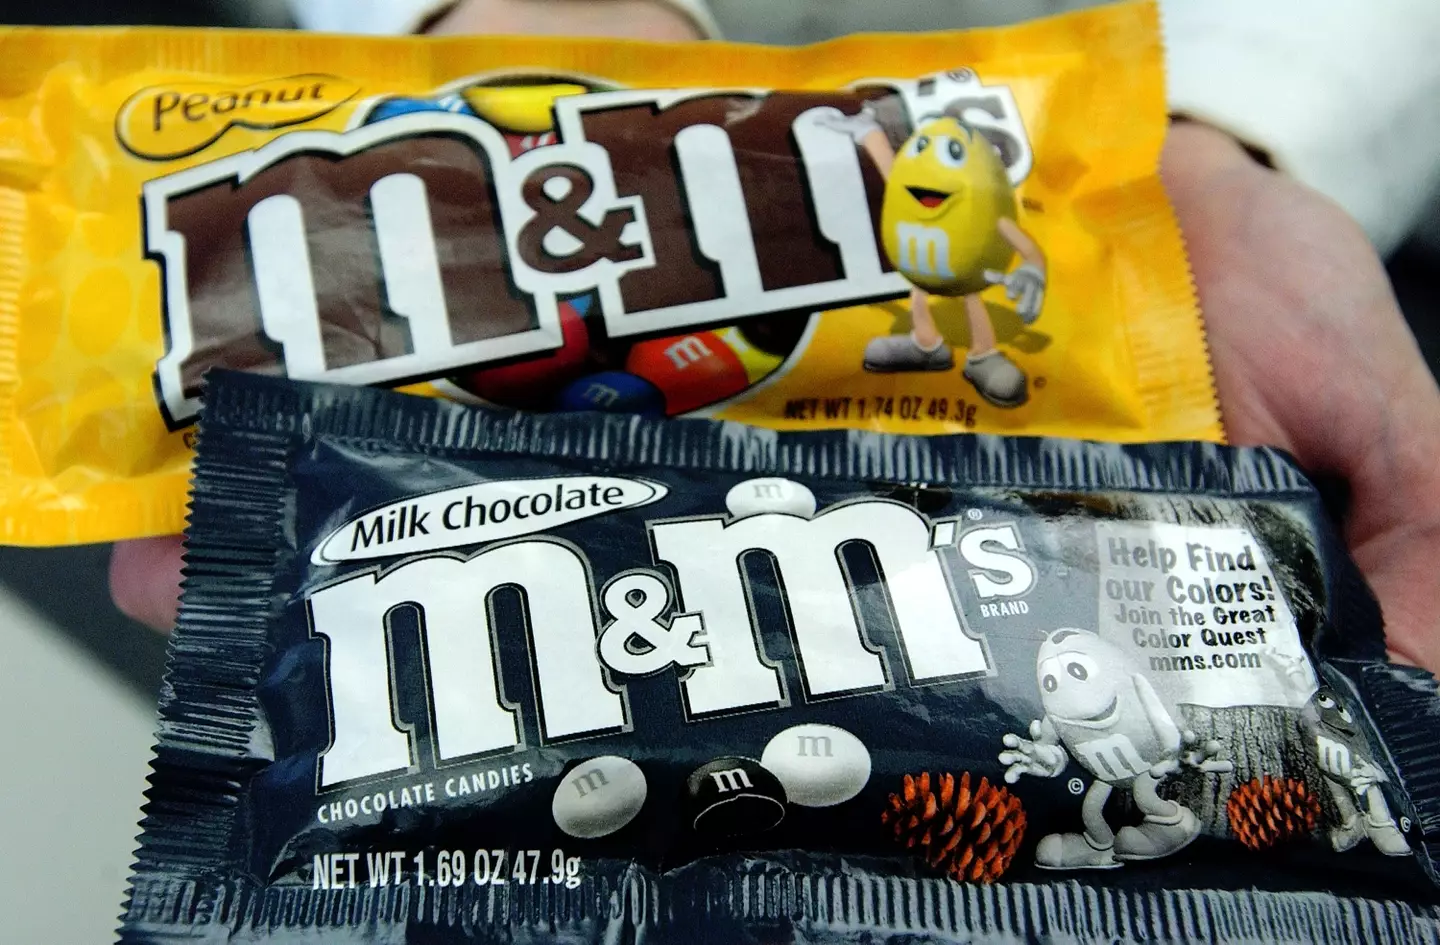 Multiple Reddit users came to the realization they never even question the story behind the iconic M&M’s name.